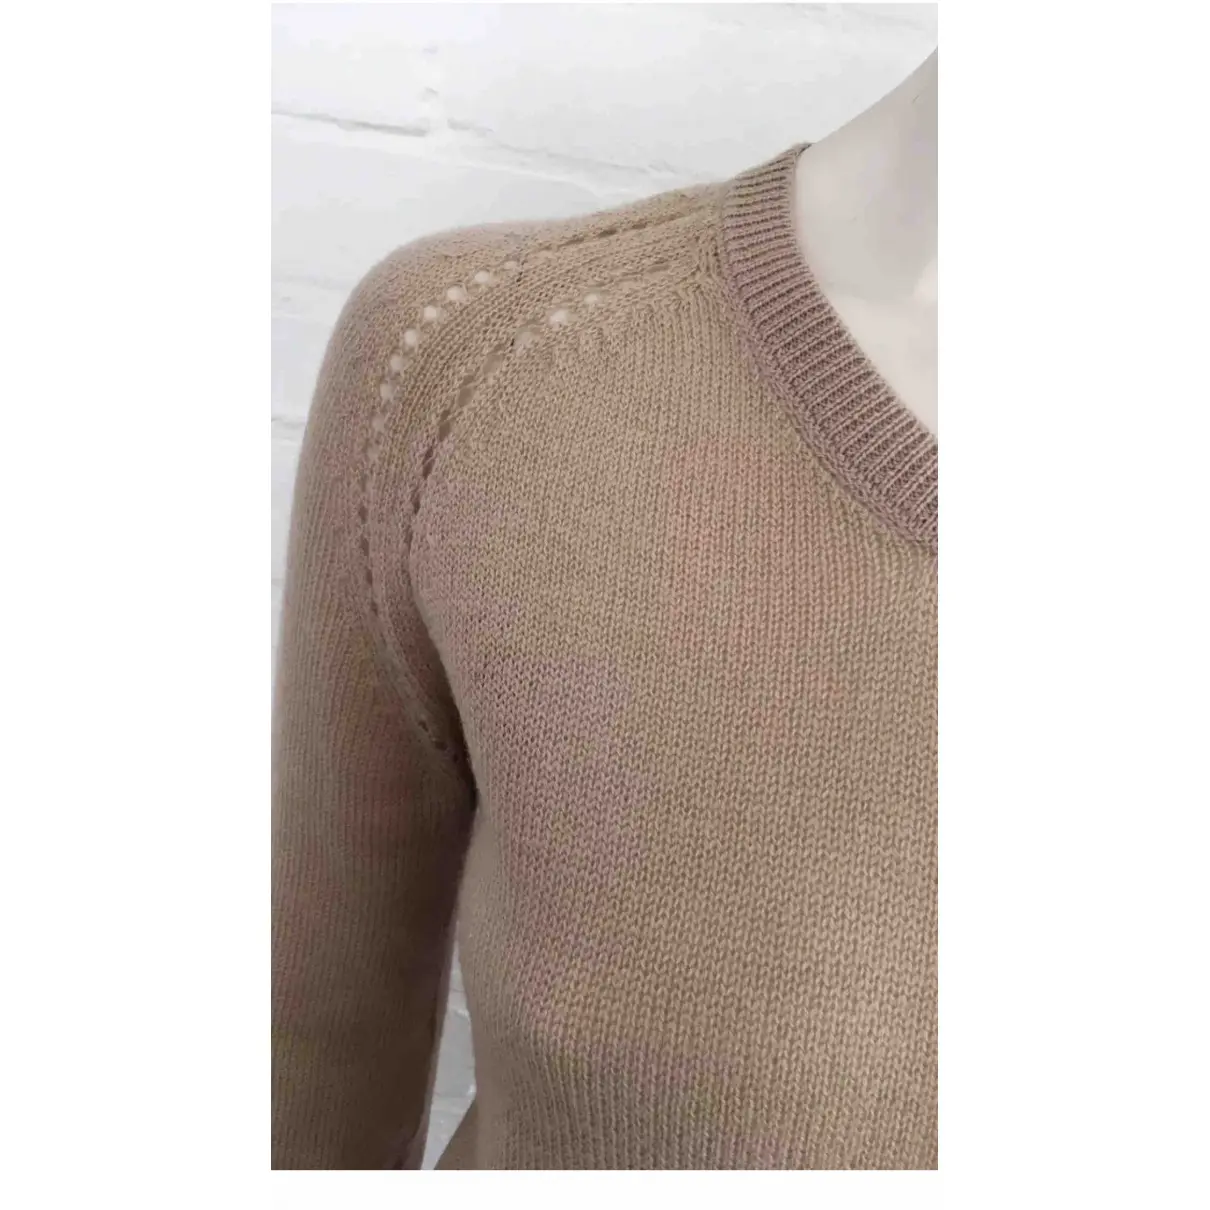 Vanessa Bruno Athe Wool jumper for sale